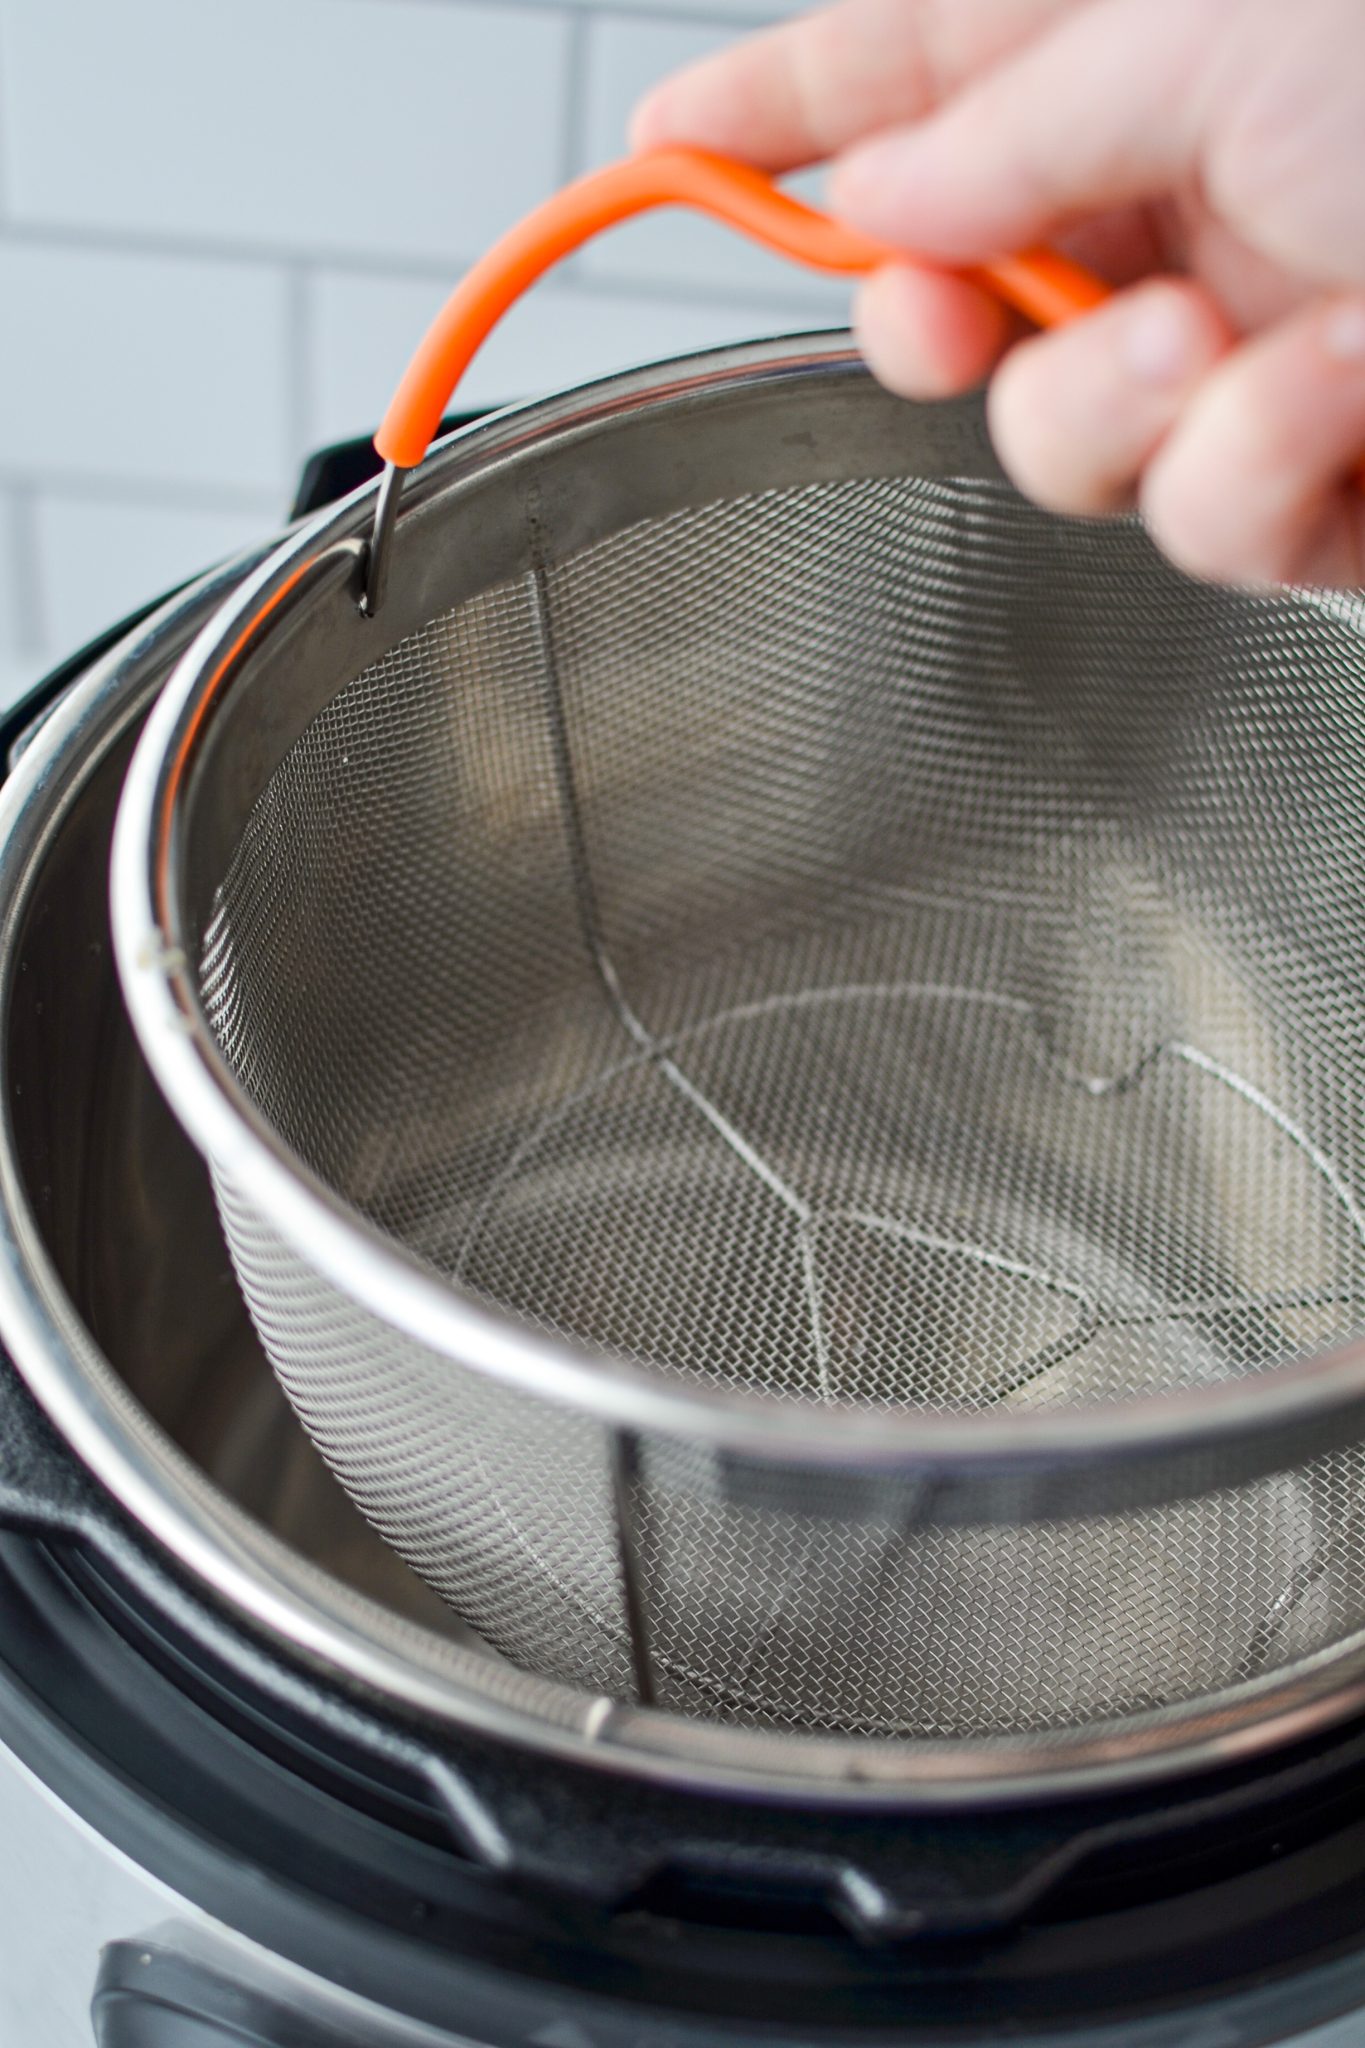 Lowering a steamer basket into the insert of an Instant Pot.